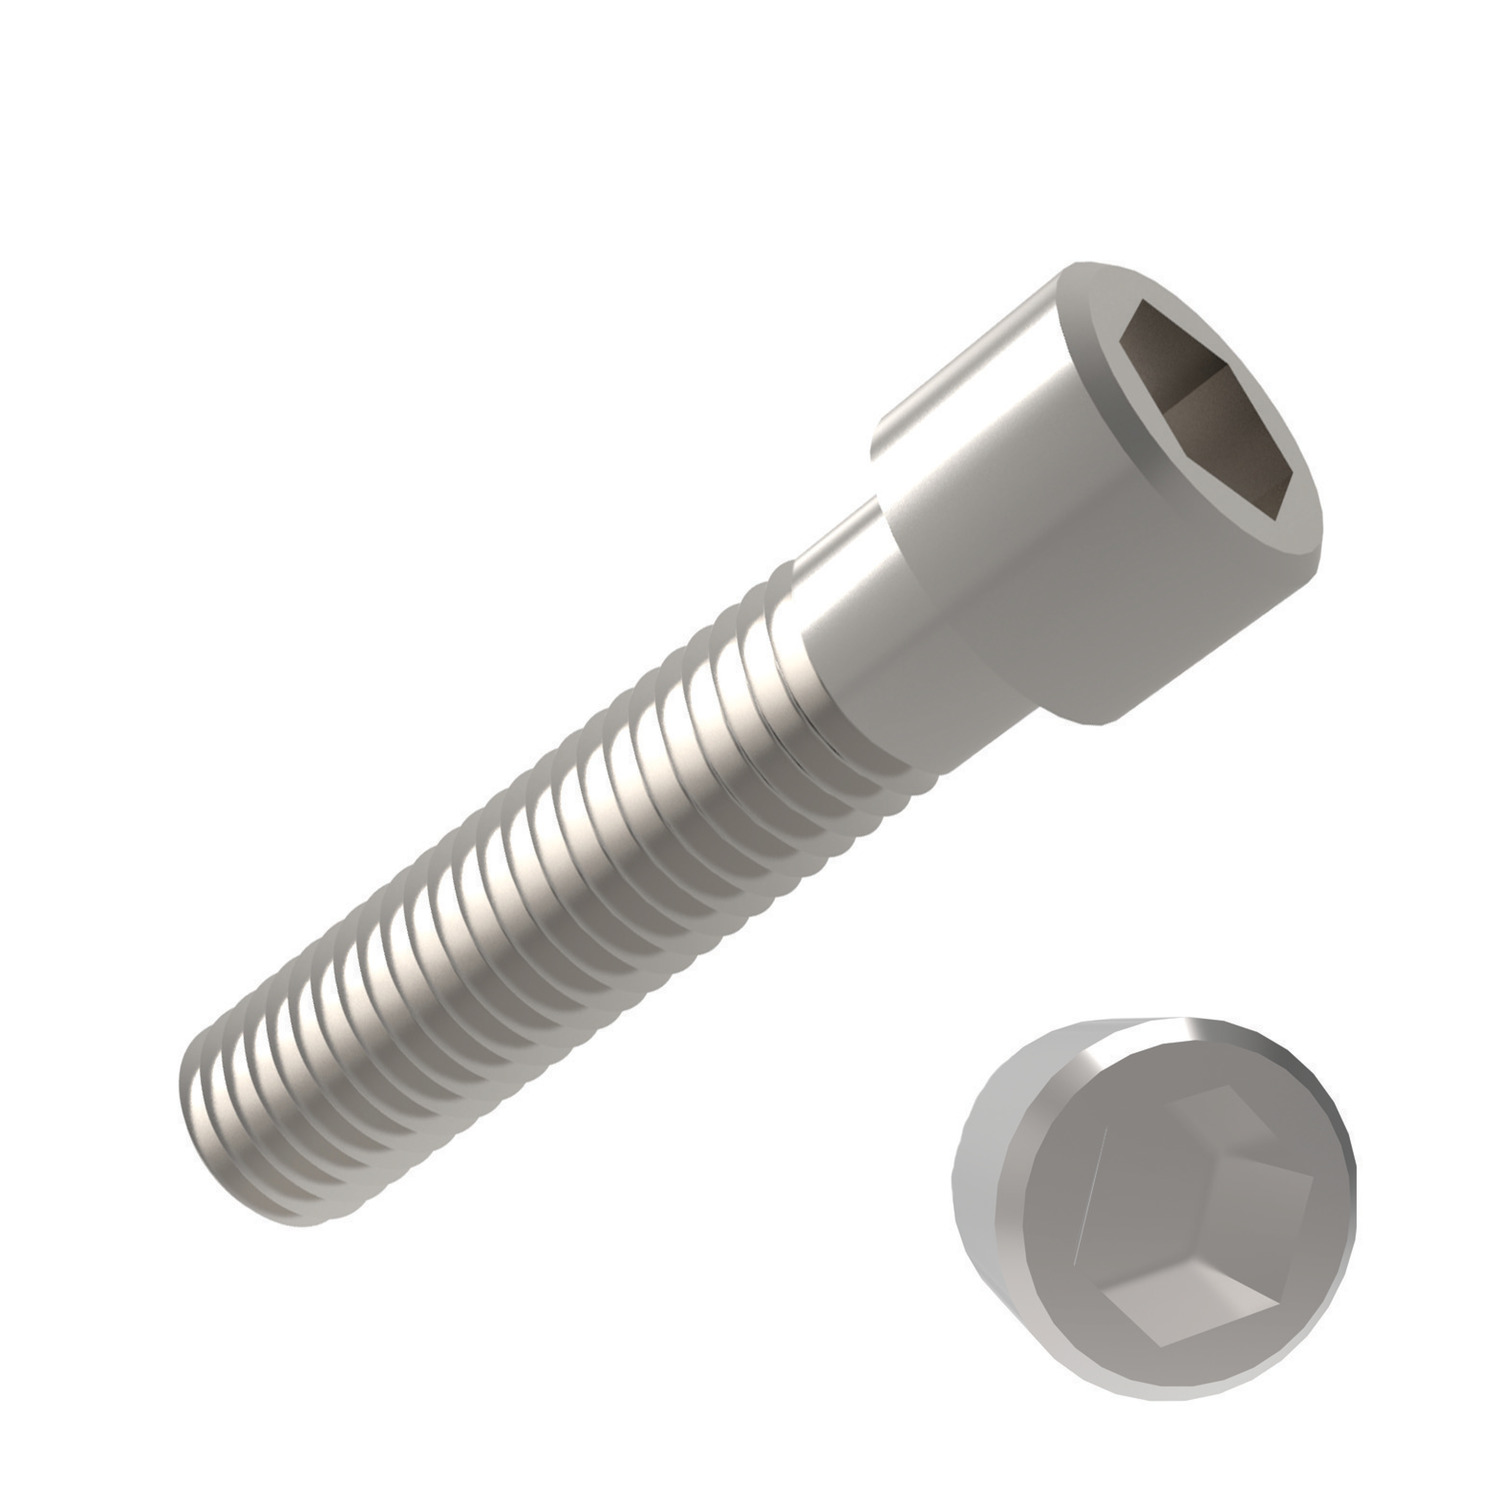 Socket Cap Screws Stainless Steel A2. For the majority of screw lengths the threads goes all the way to the head of the screw (i.e. l1= l2) less 2.5 thread pitches.  Also available in Zinc Plated (P0200.ZP), A4 Stainless (P0200.A4) and Steel (P0200.SC)